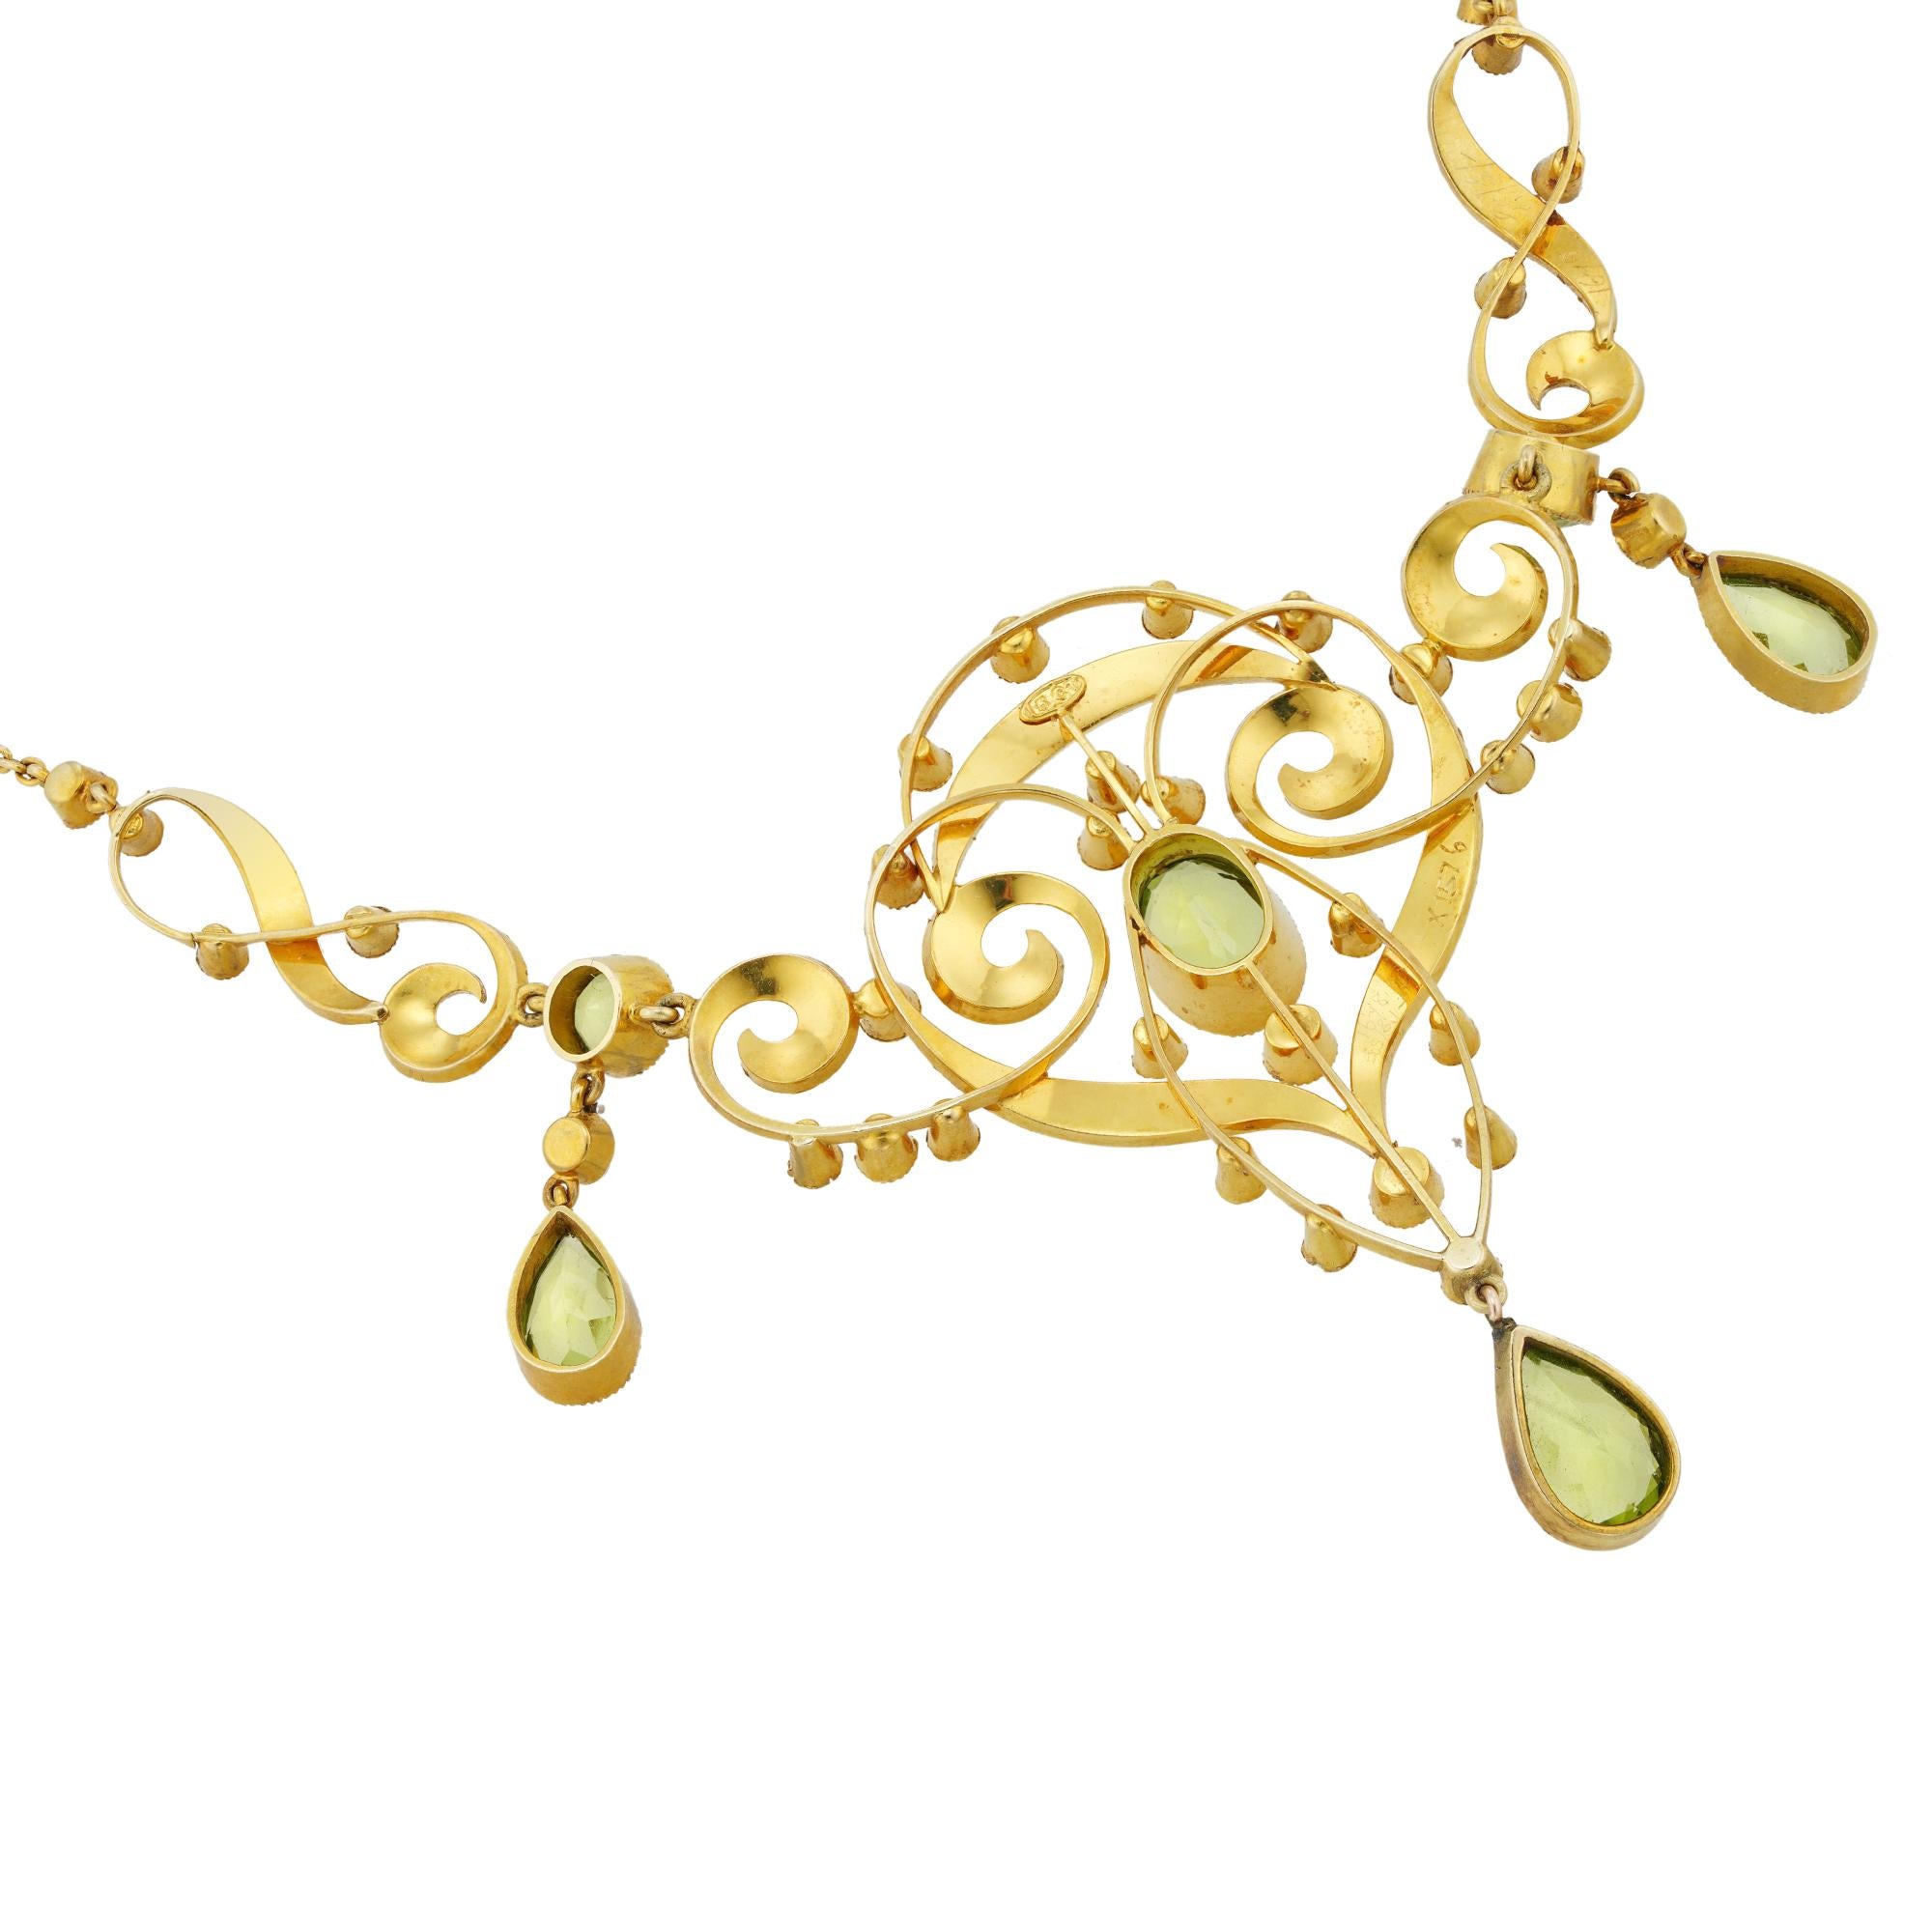 An Edwardian peridot and pearl necklace, to the centre an oval faceted peridot measuring 10x7mm millegrain-set to yellow gold collet, surrounded by gold openwork scroll-design frame embellished with small half pearls, and suspending a pear-shaped